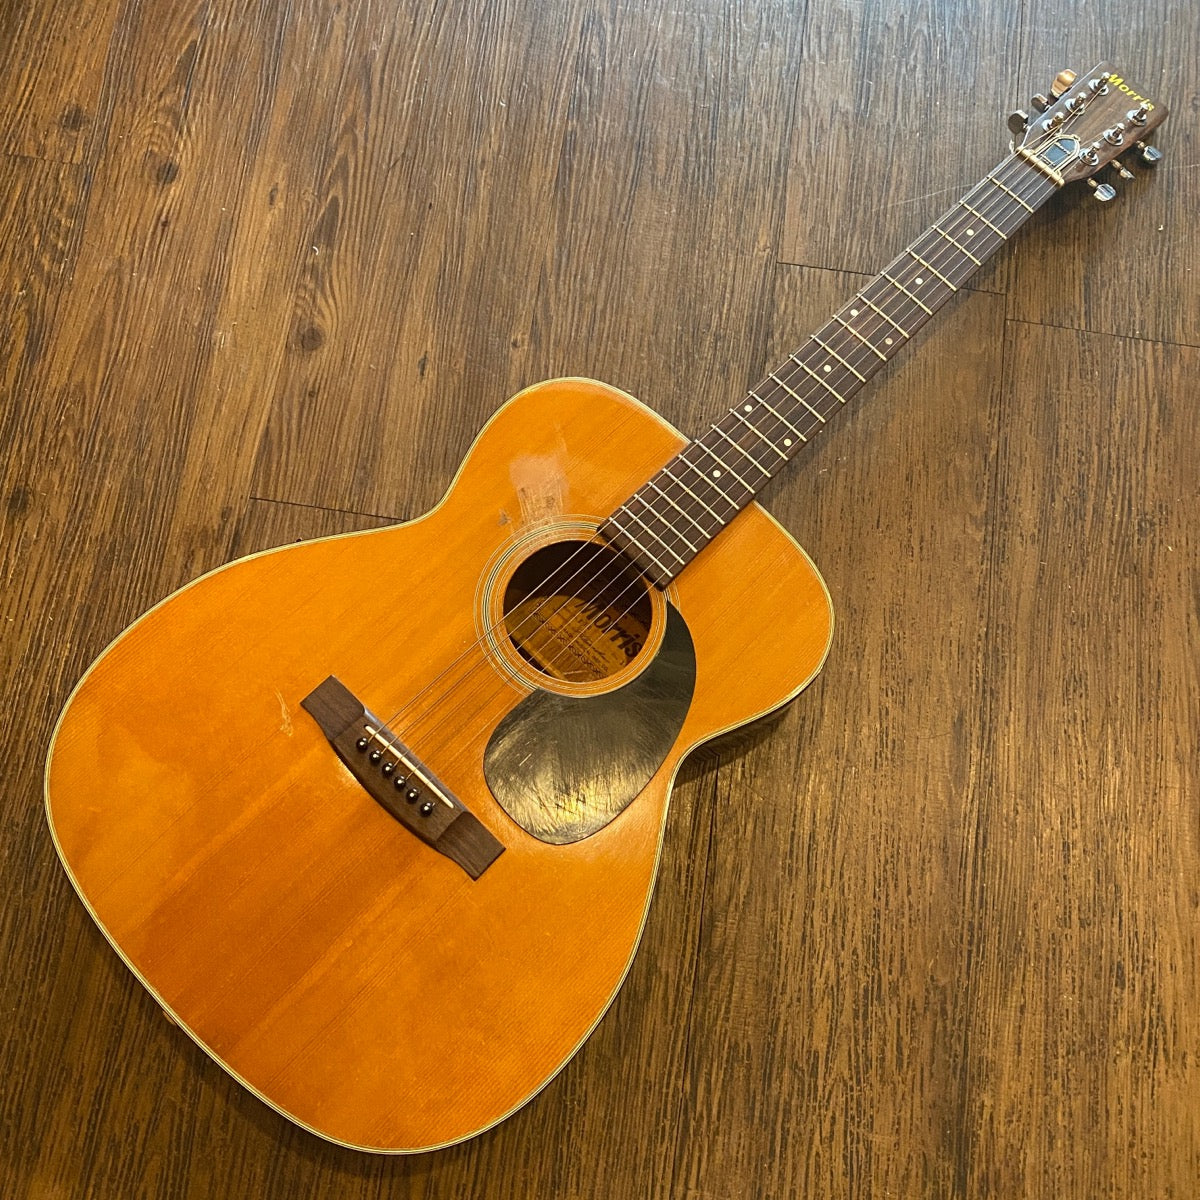 Morris F-12 Acoustic Guitar 1973 Made in Japan -GrunSound-x014-